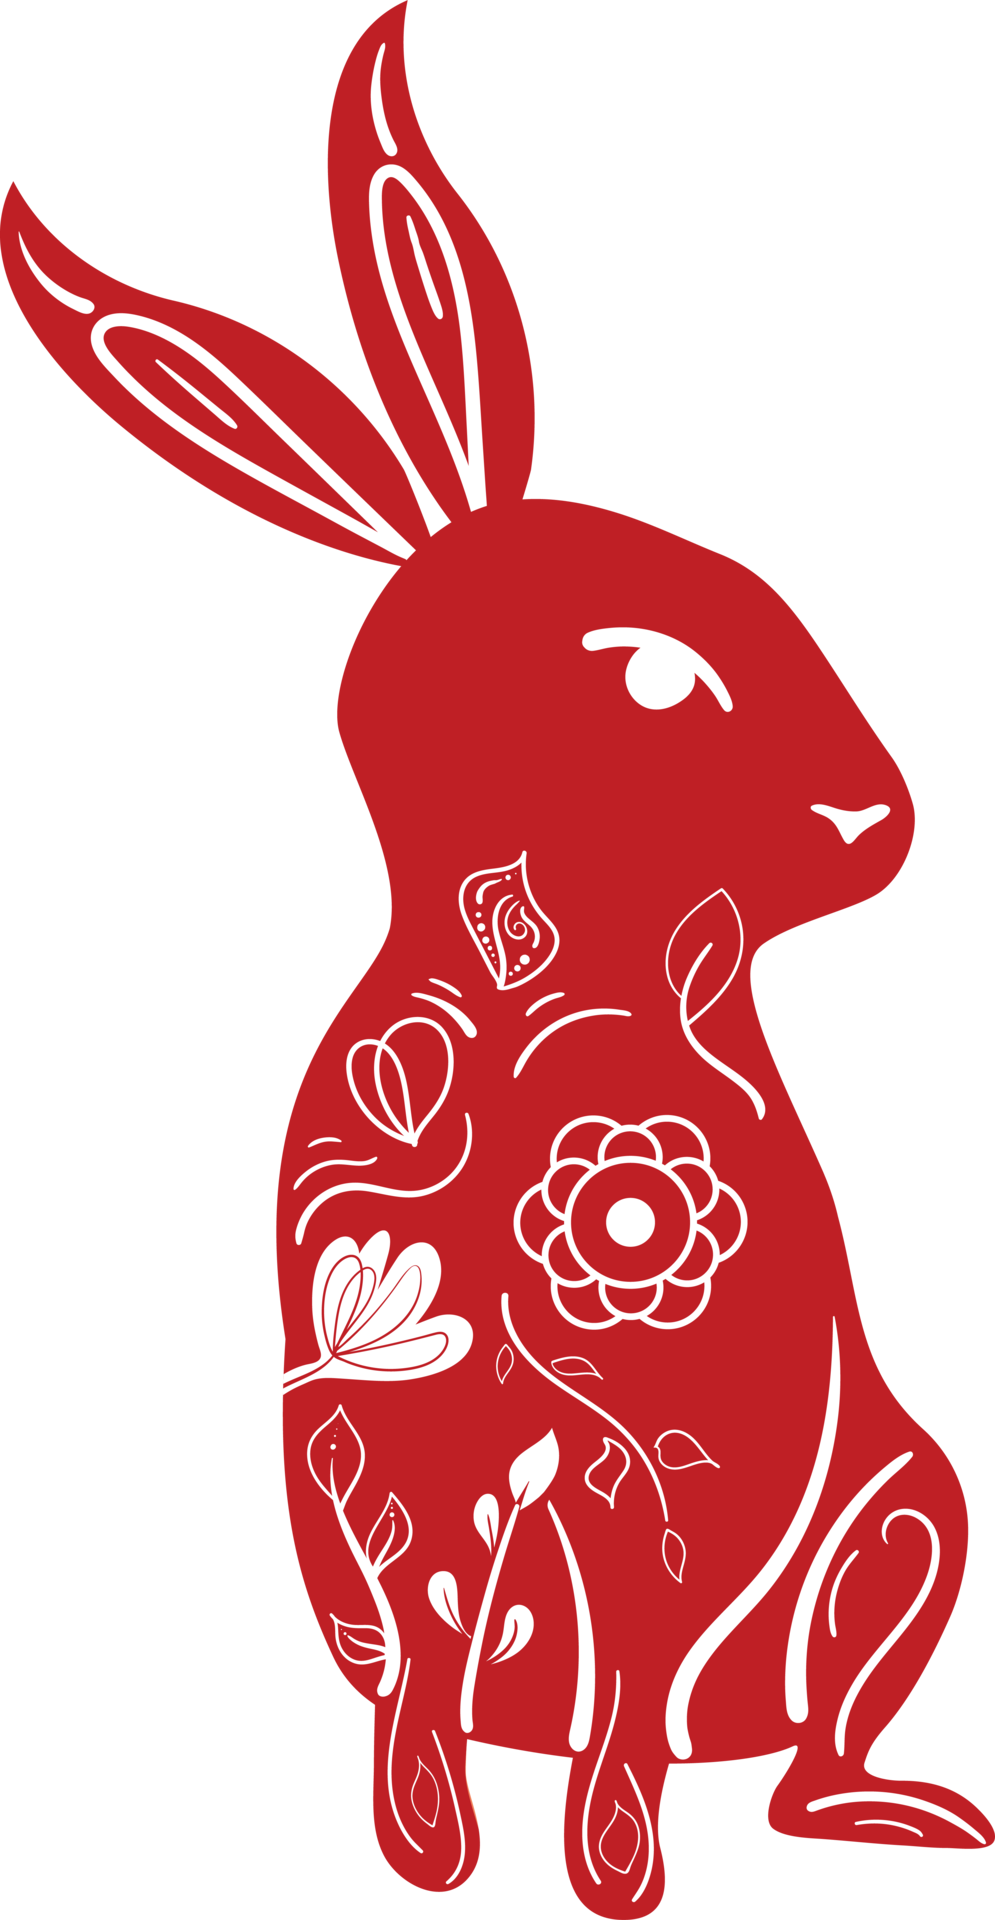 Chinese New Year Zodiac Red Rabbit with White Floral Ornament